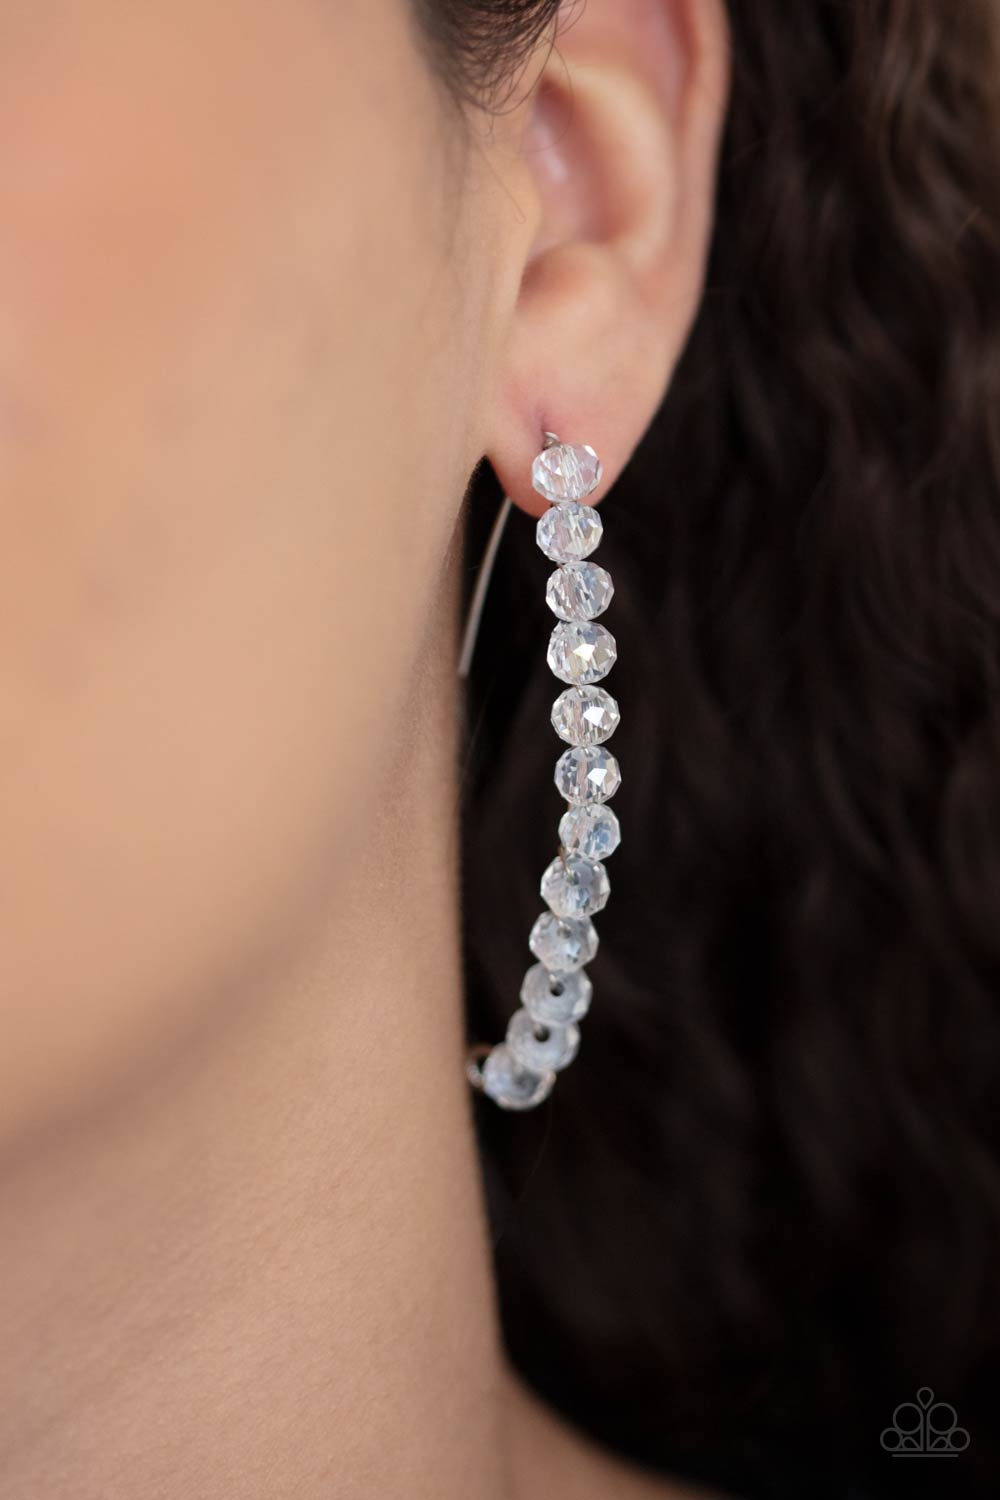 GLOW Hanging Fruit Iridescent White Rhinestone Post Earrings - Paparazzi Accessories- model - CarasShop.com - $5 Jewelry by Cara Jewels